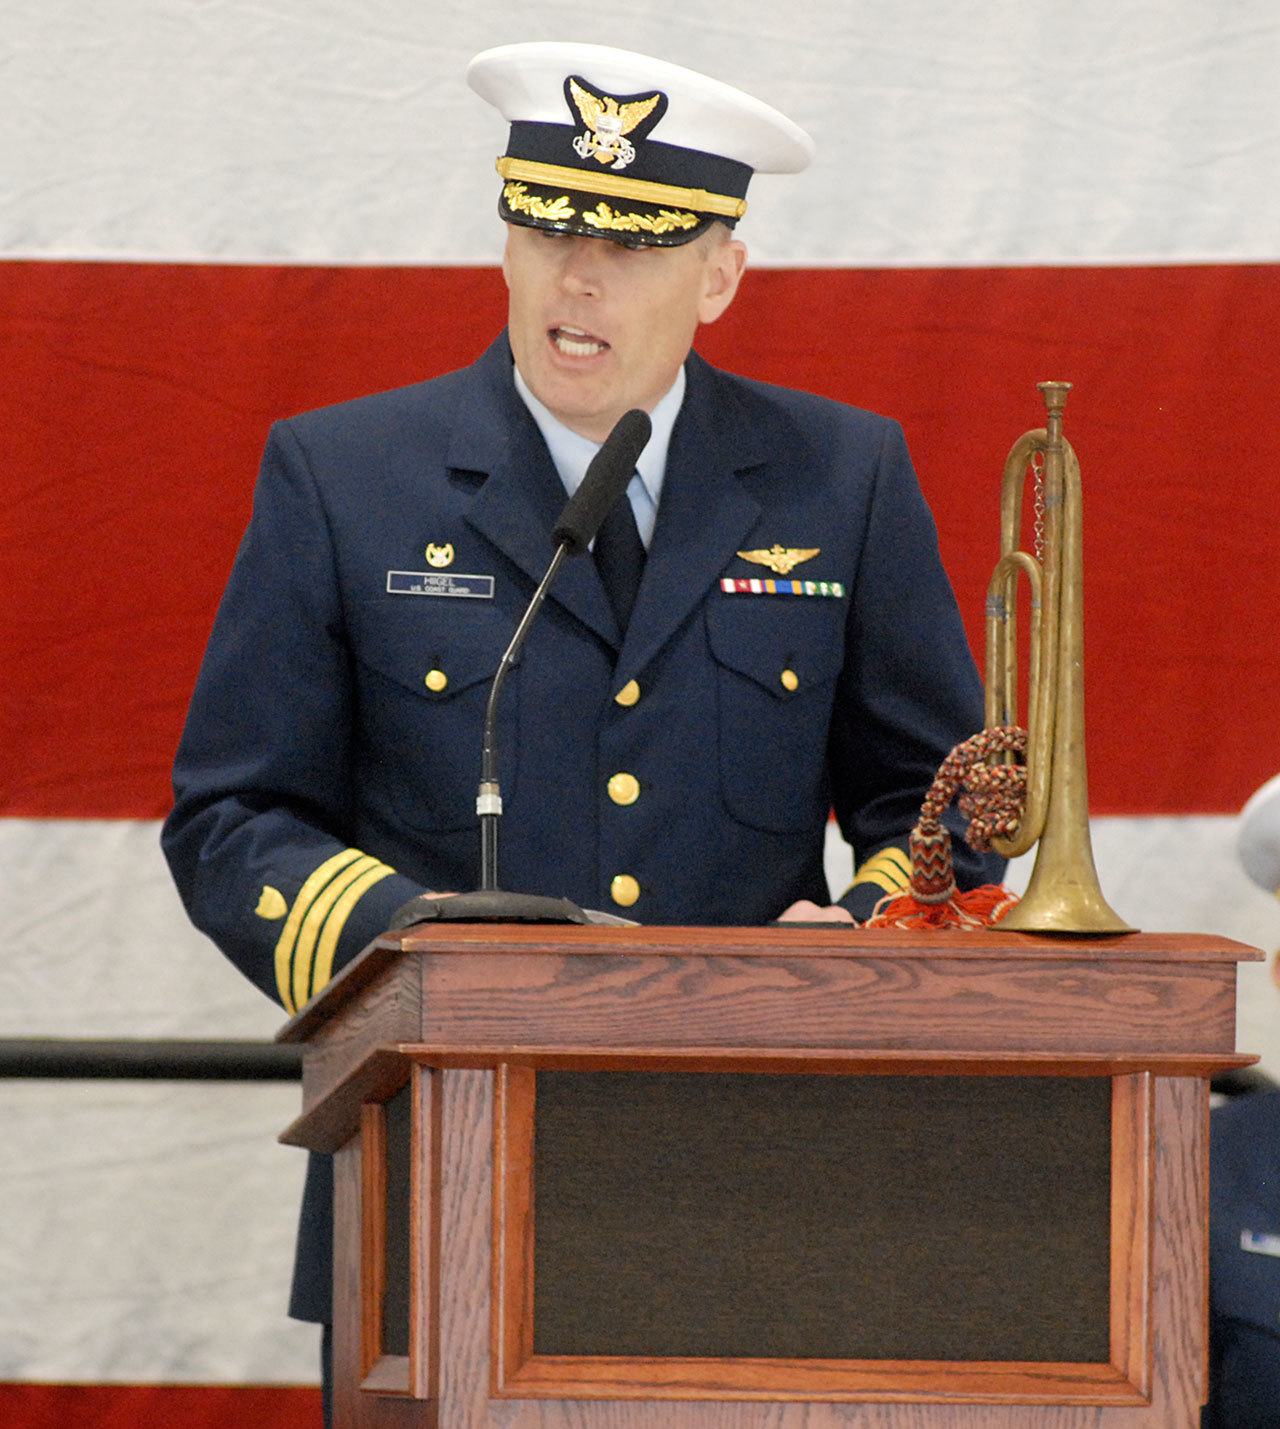 A family heirloom bugle graces the dais as U.S. Coast Guard Cmdr. Mark Hiigel, commanding officer of Air Station/Sector Field Office Port Angeles, speaks during Friday’s Veterans Day ceremony. (Keith Thorpe/Peninsula Daily News)